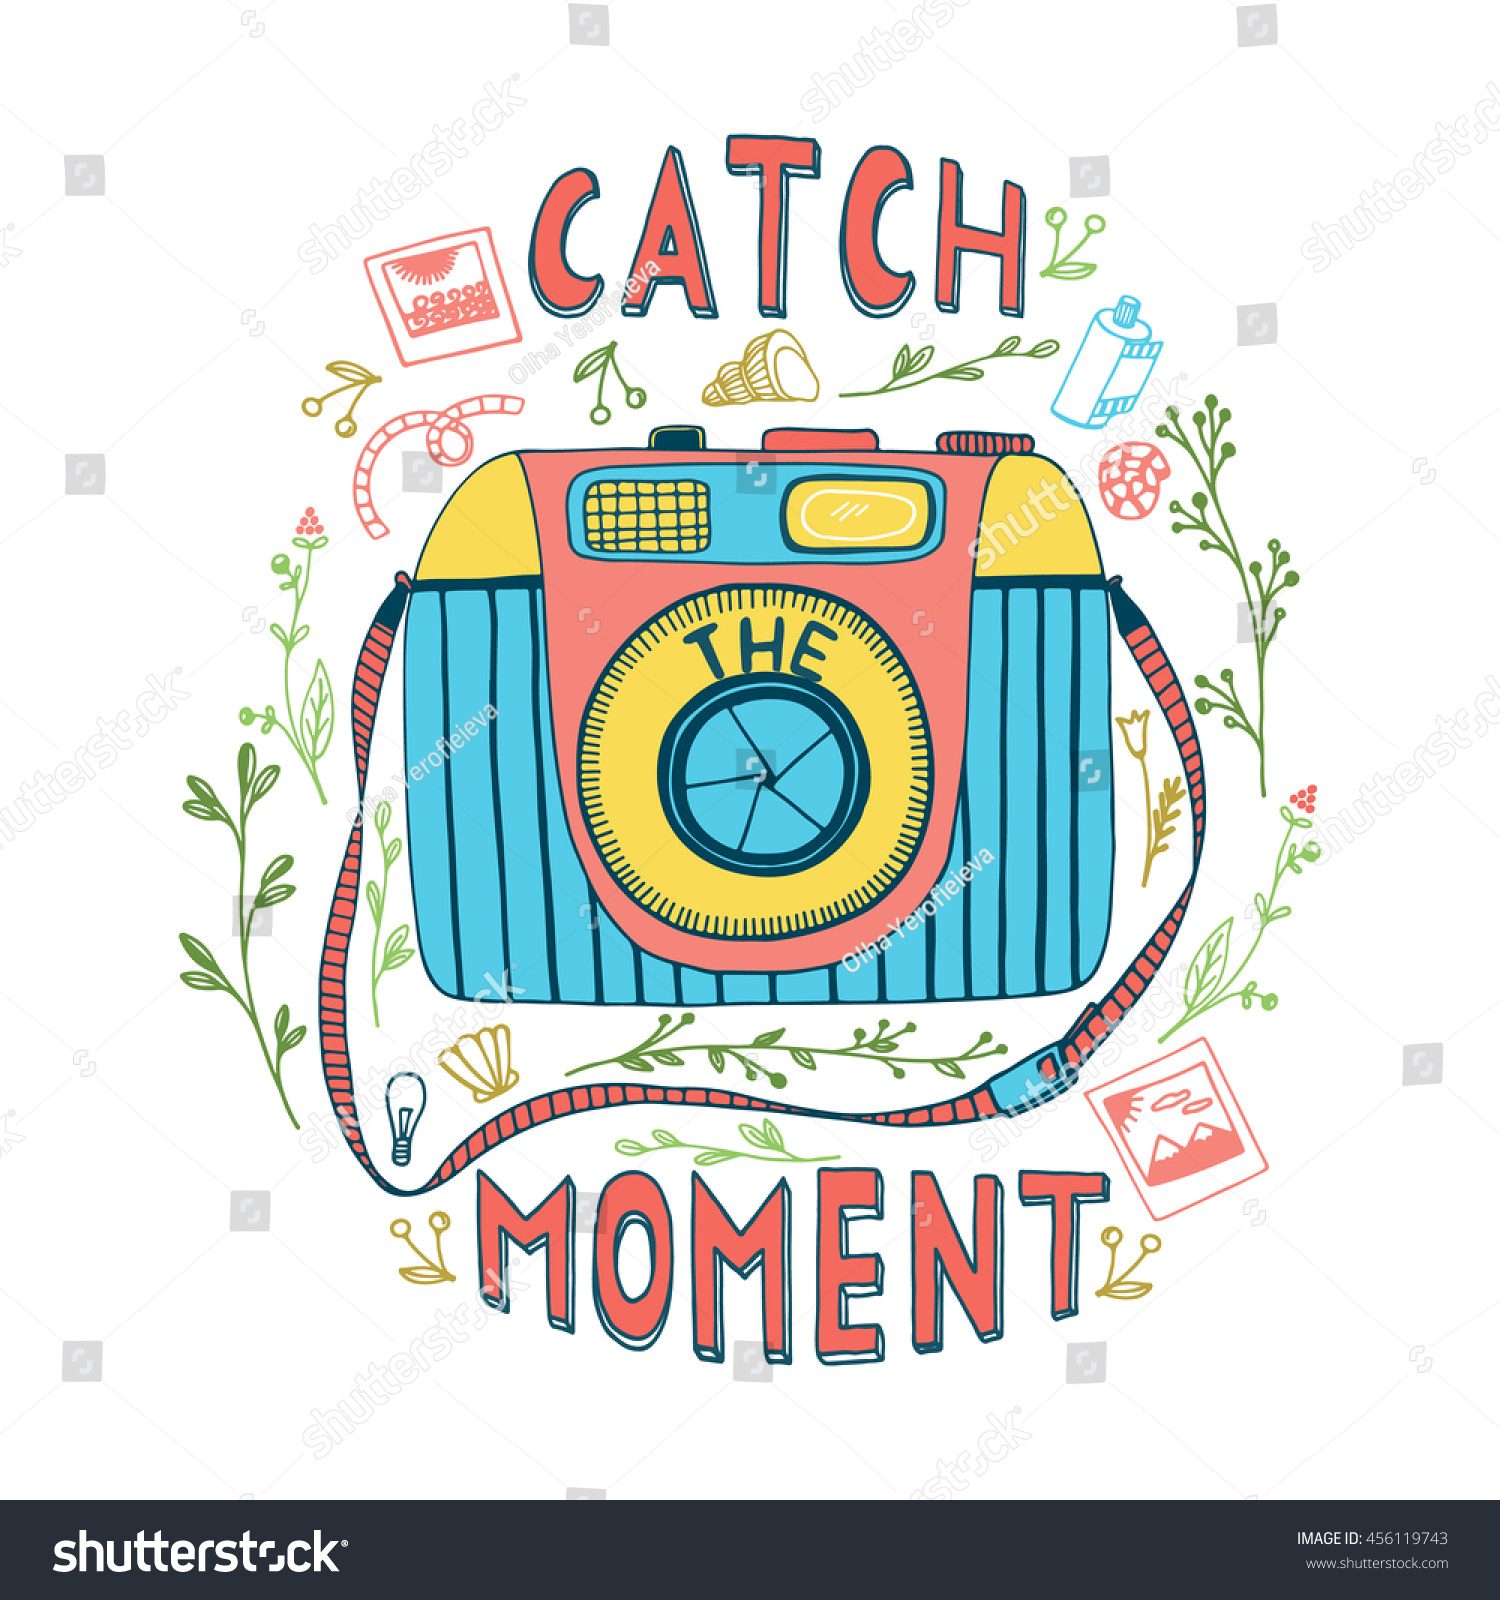 Catch Moment Motivational Quote Hand Drawn Stock Vector Royalty Free 456119743